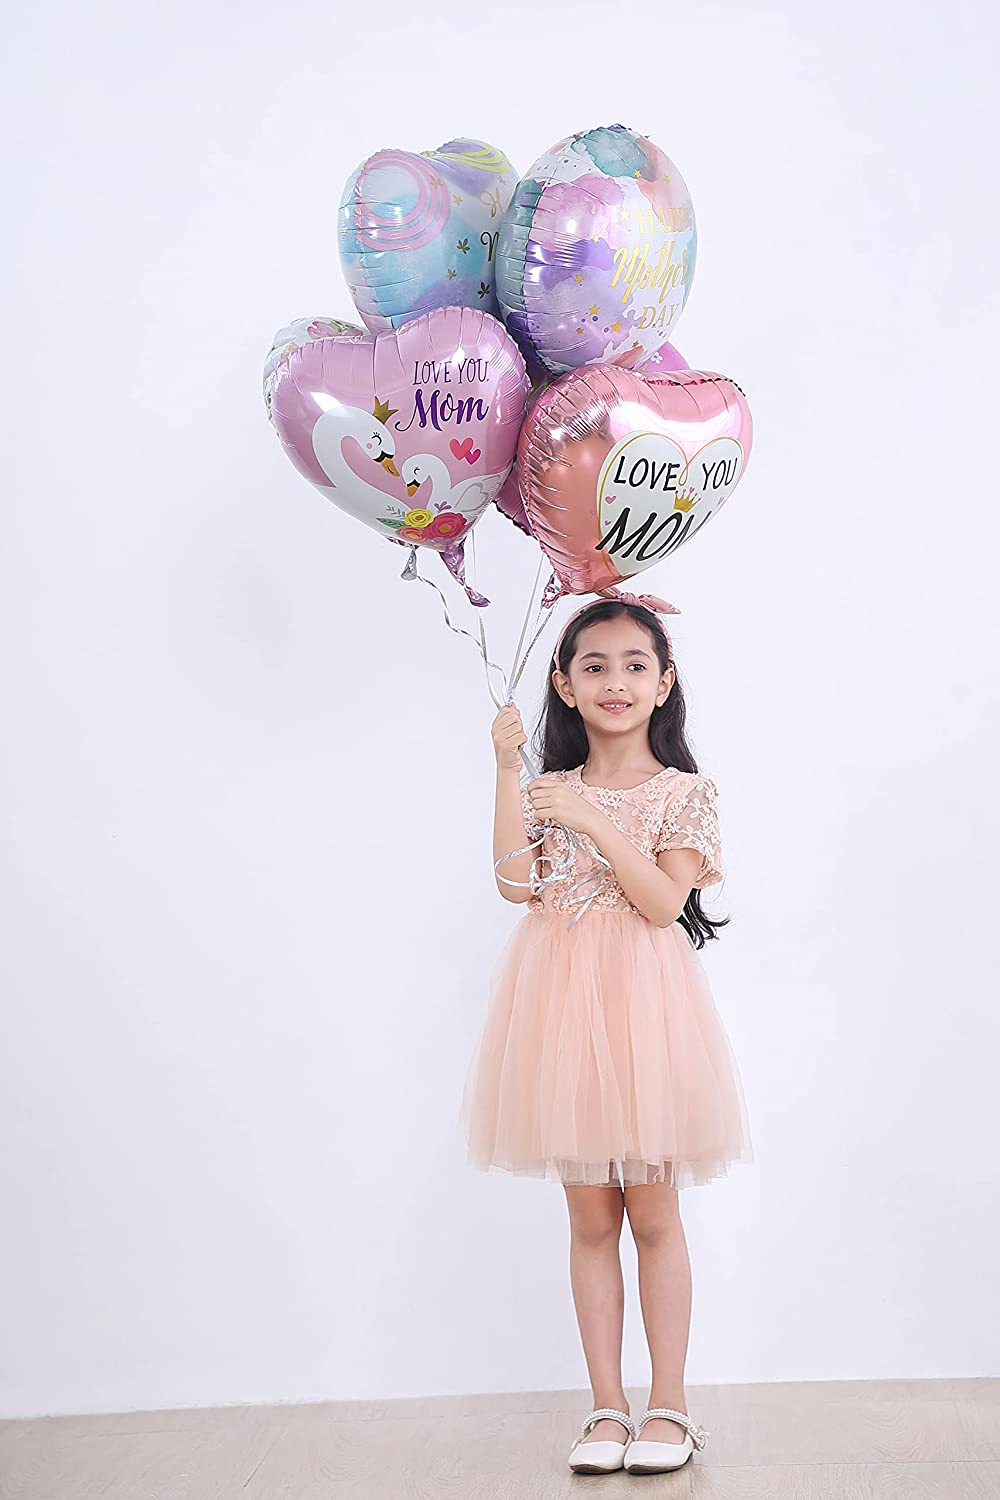 12 Pcs Mother’S Day Party Balloons Kit Decorations 16 Inch Foil Balloon Set Happy Mother'S Day Best Mom Balloon Set Heart Shape Set Decoration for Mother'S Day Family Party Home Decoration for Mother'S Day Party(12 Pcs)